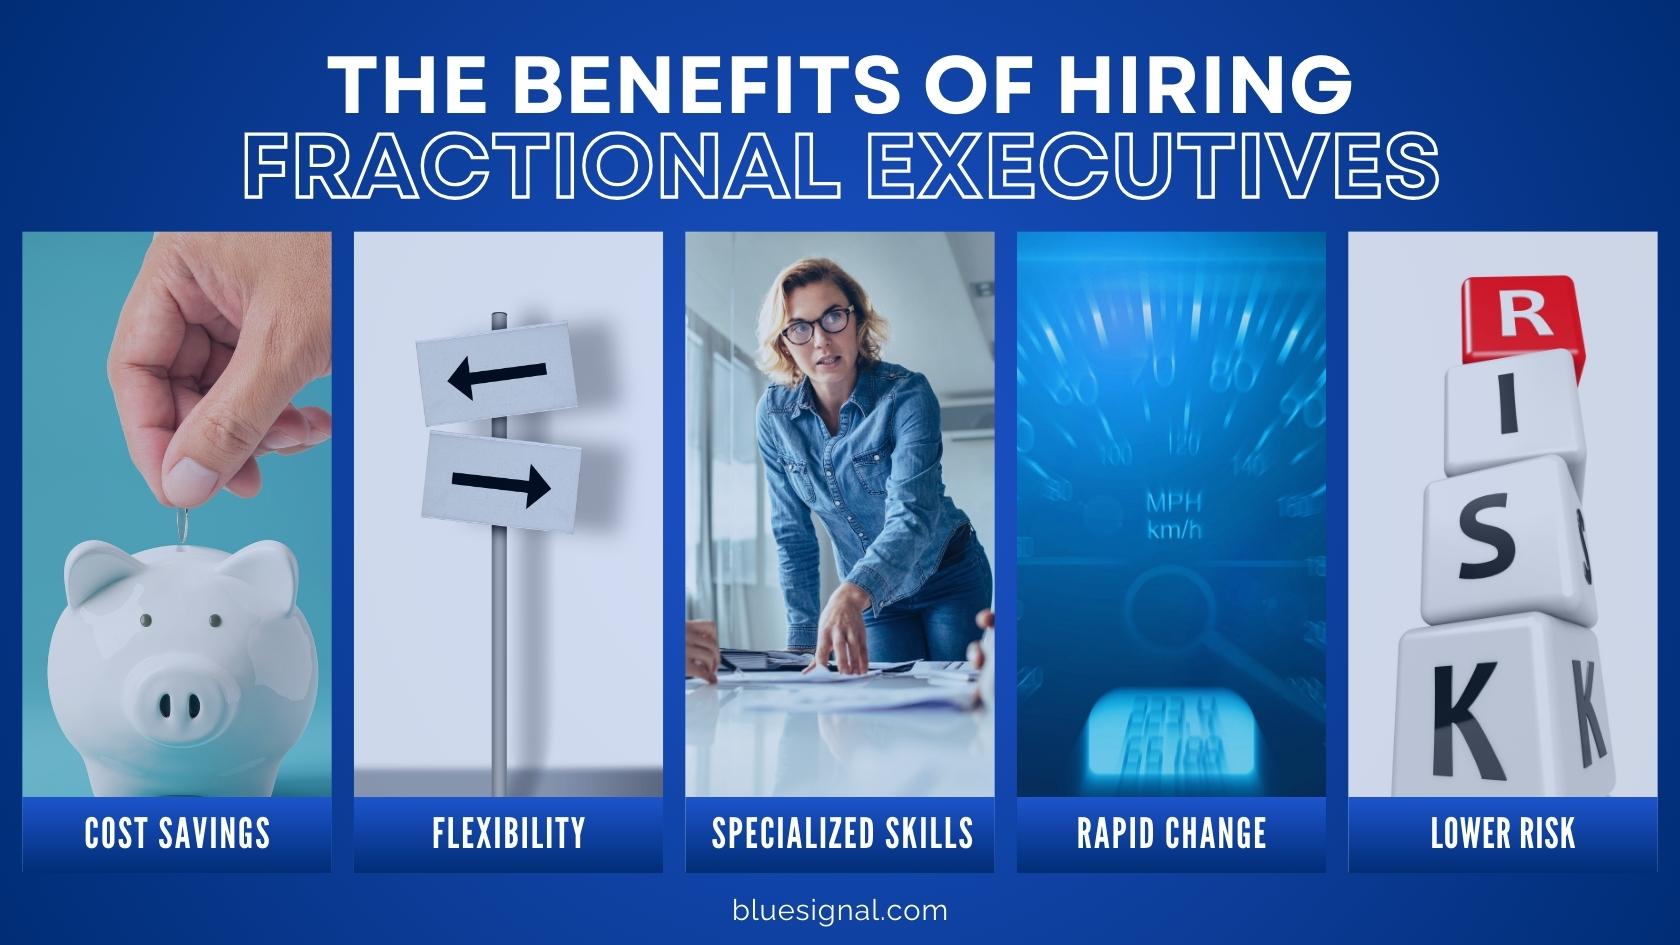 Infographic showcasing the benefits of hiring fractional executives, including cost savings, flexibility, specialized skills, rapid change, and lower risk.